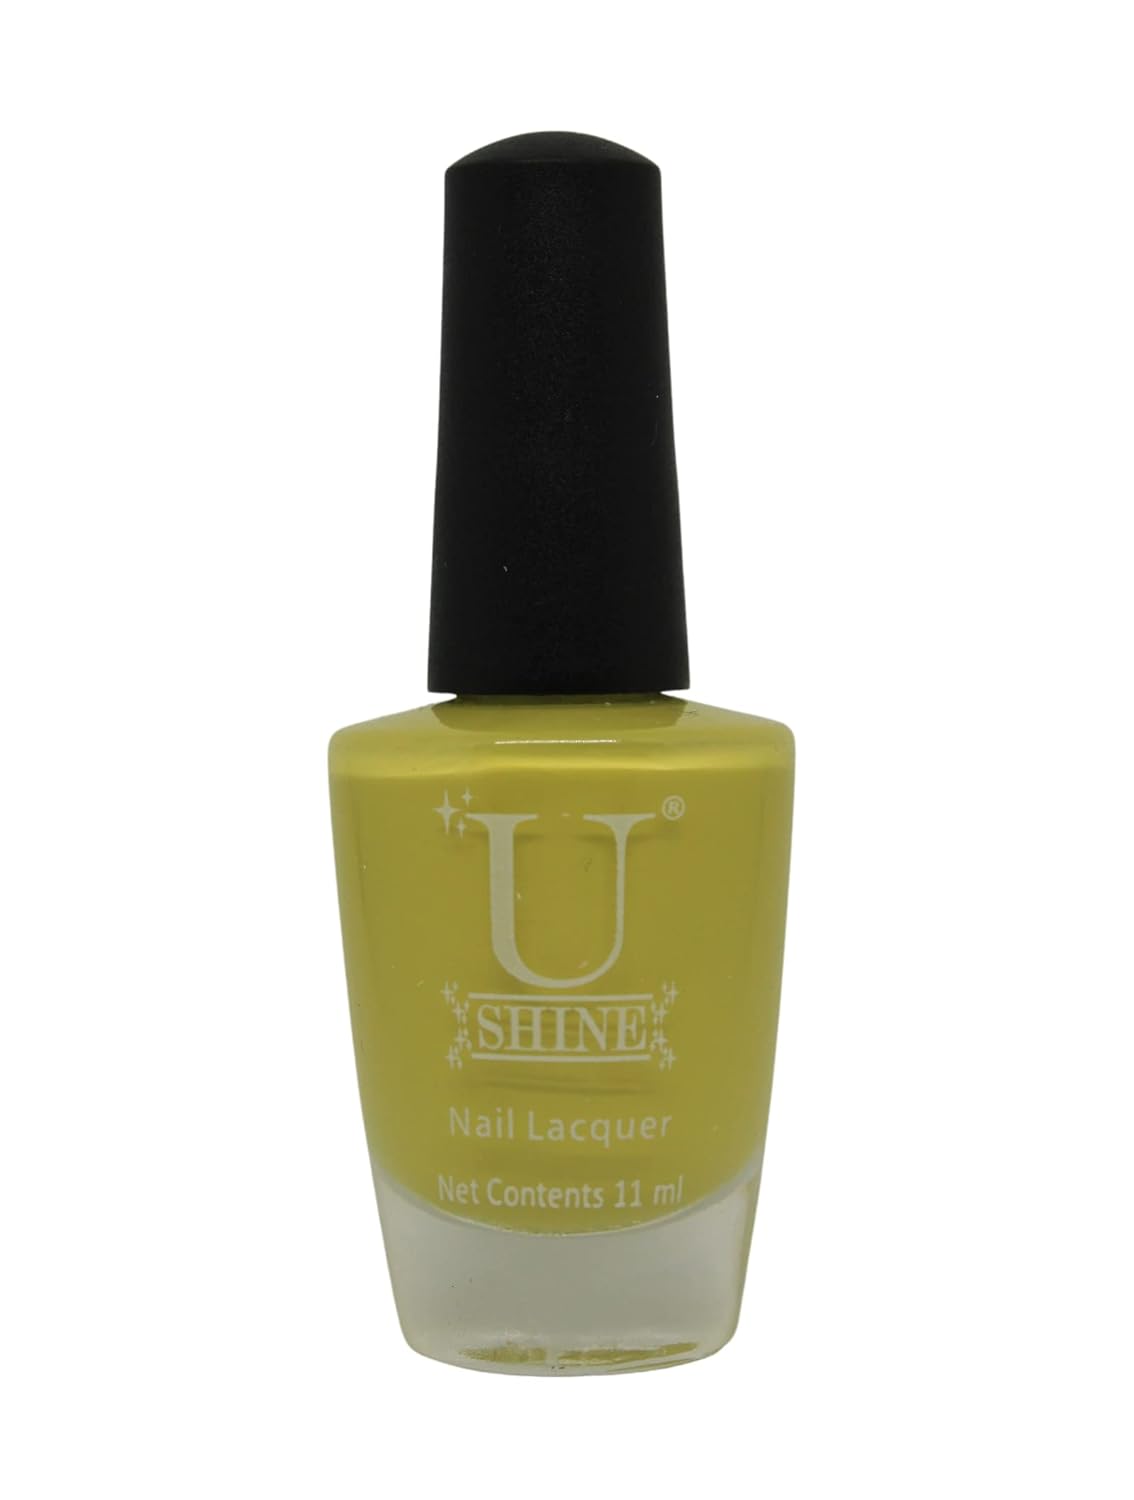 U Shine Brassica |Yellow Crème |11ml |No Paraben, Nail Yellowing, Chipping, Cracking & Long Wear | Vegan & FREE from Harmful Chemicals